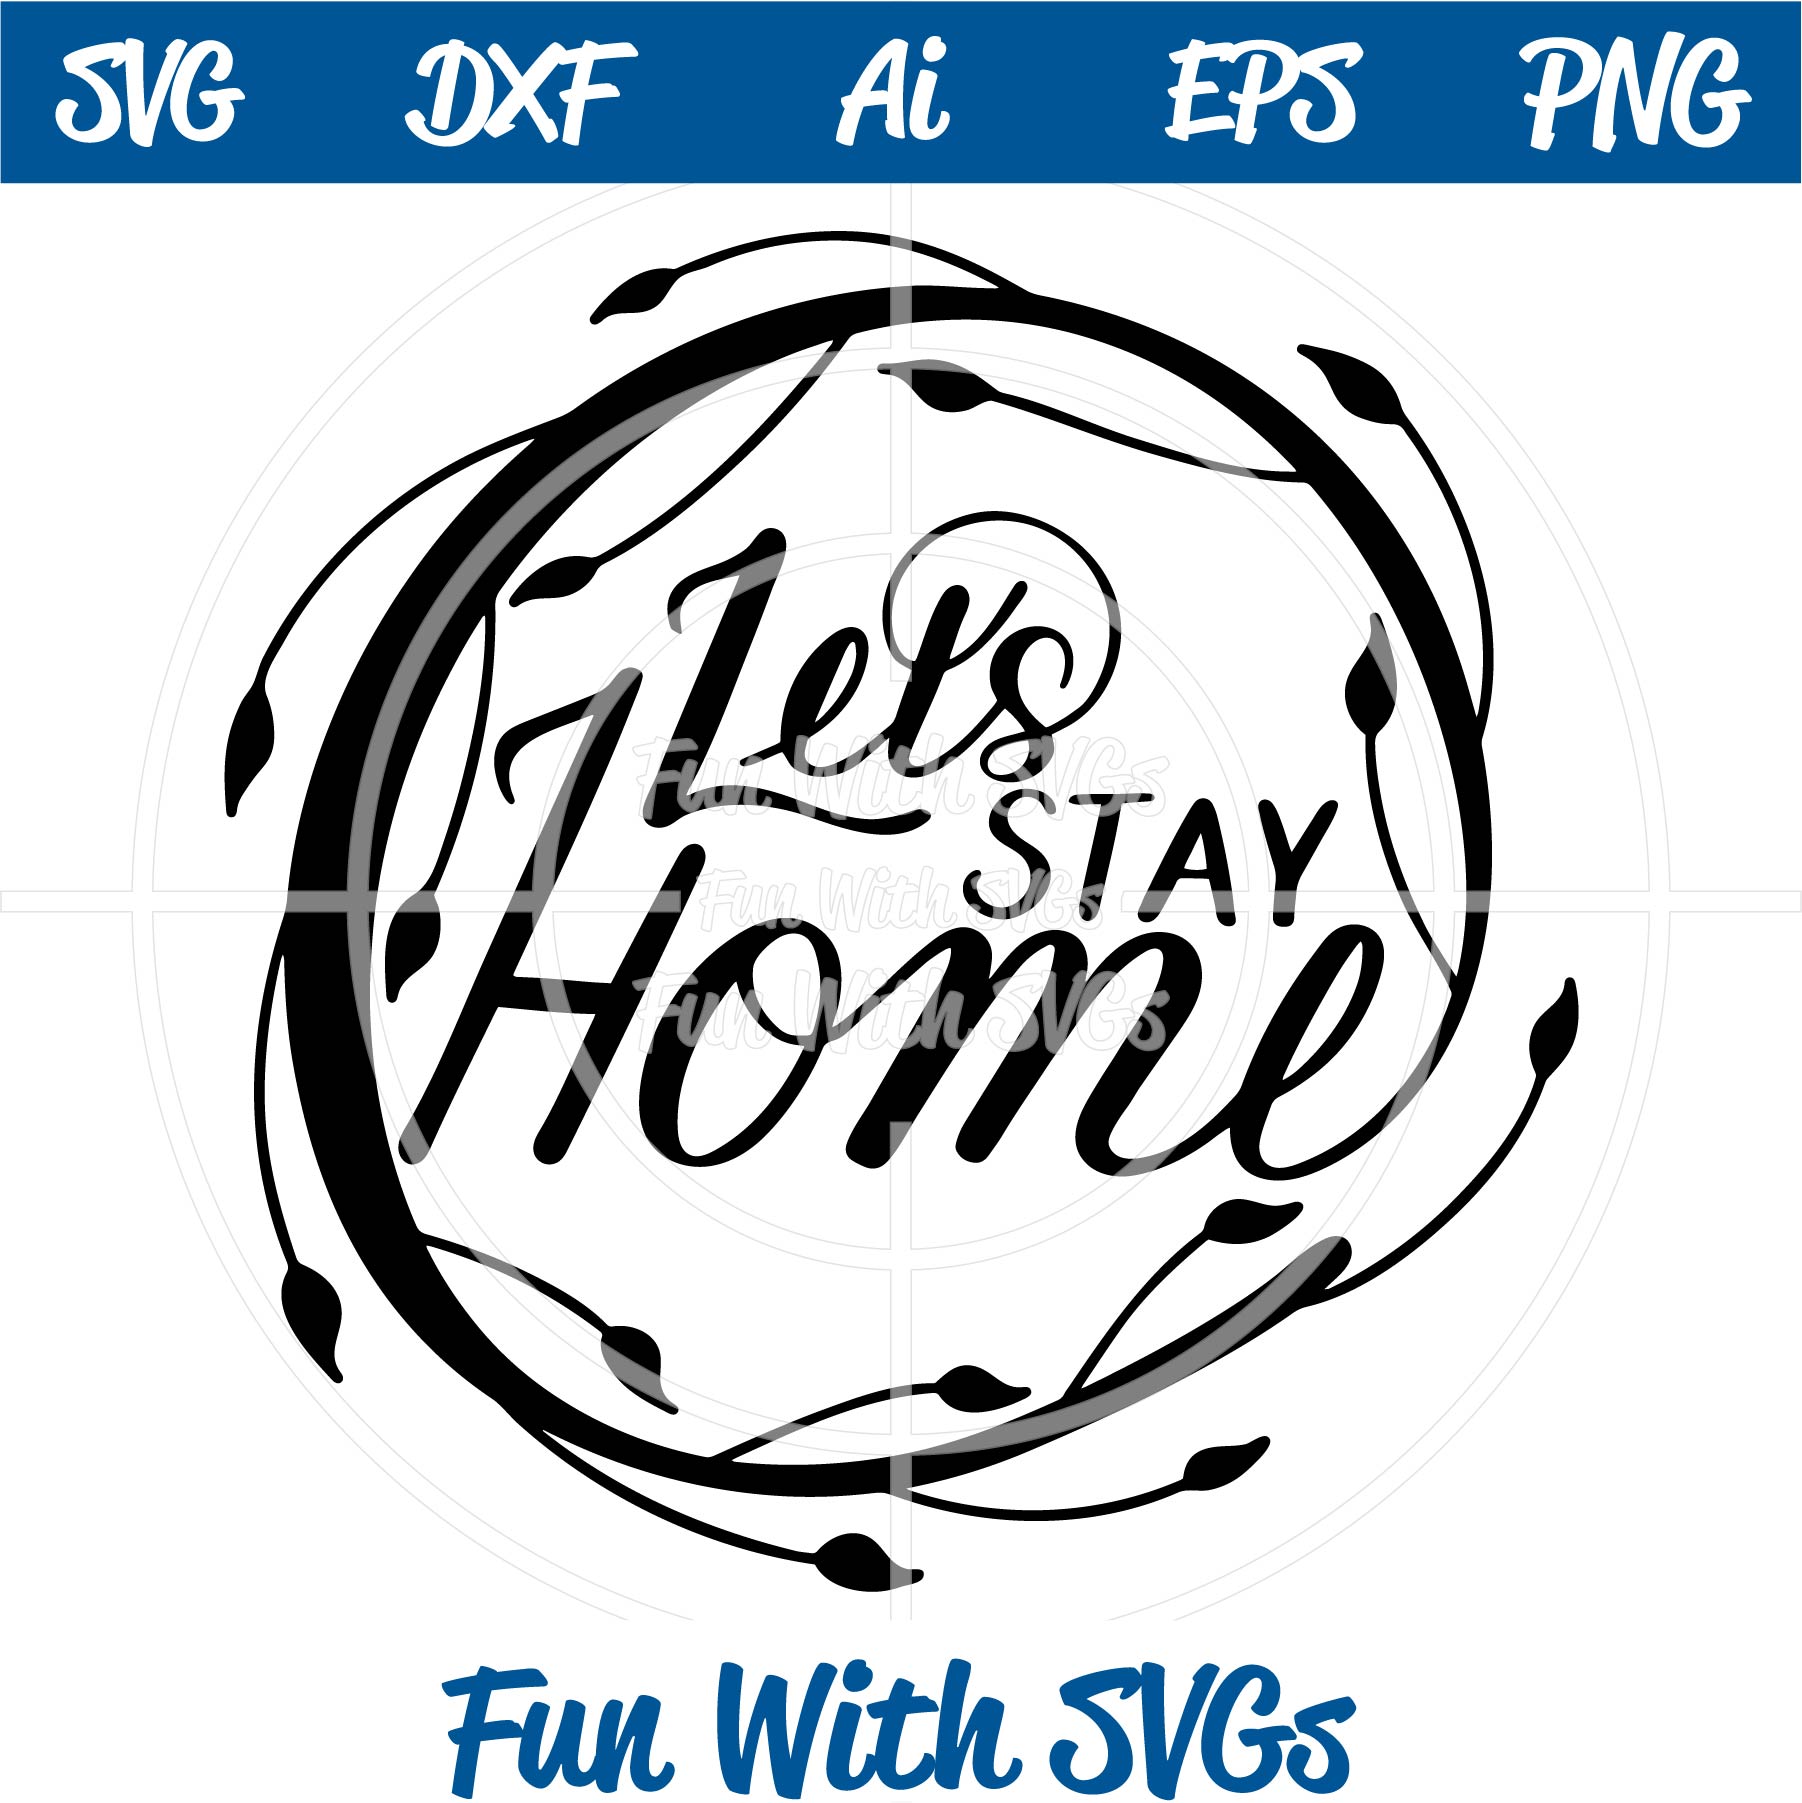 Let's Stay Home SVG Cut File ~ Fun With SVGs Relationship ...